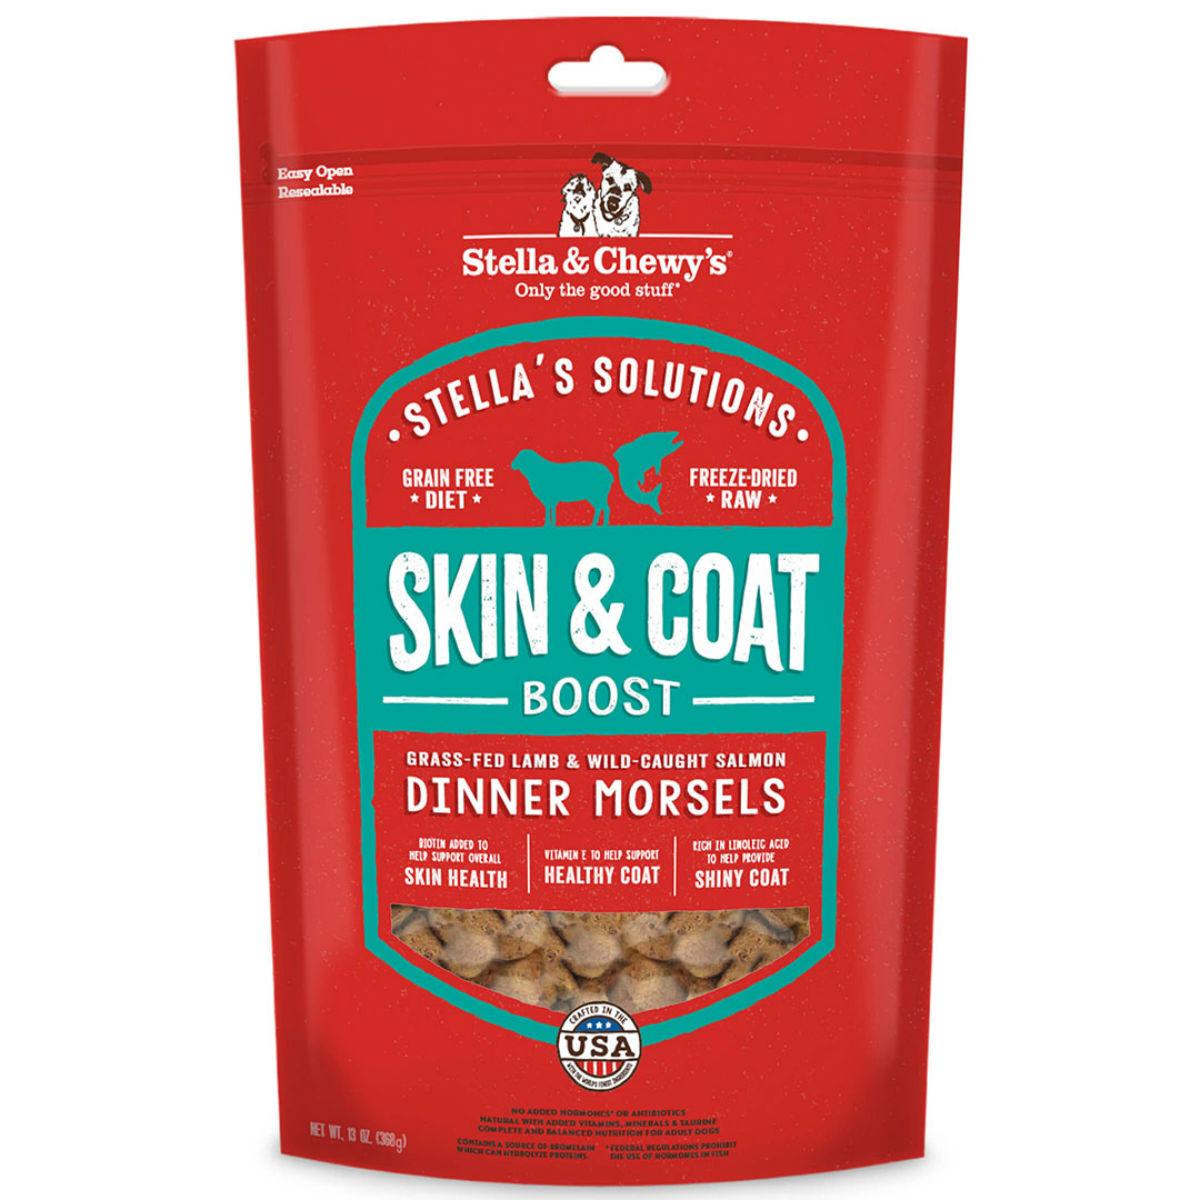 Stella & Chewy's Solutions Skin & Coat Boost Dinner Morsels Dog Food - Lamb & Salmon